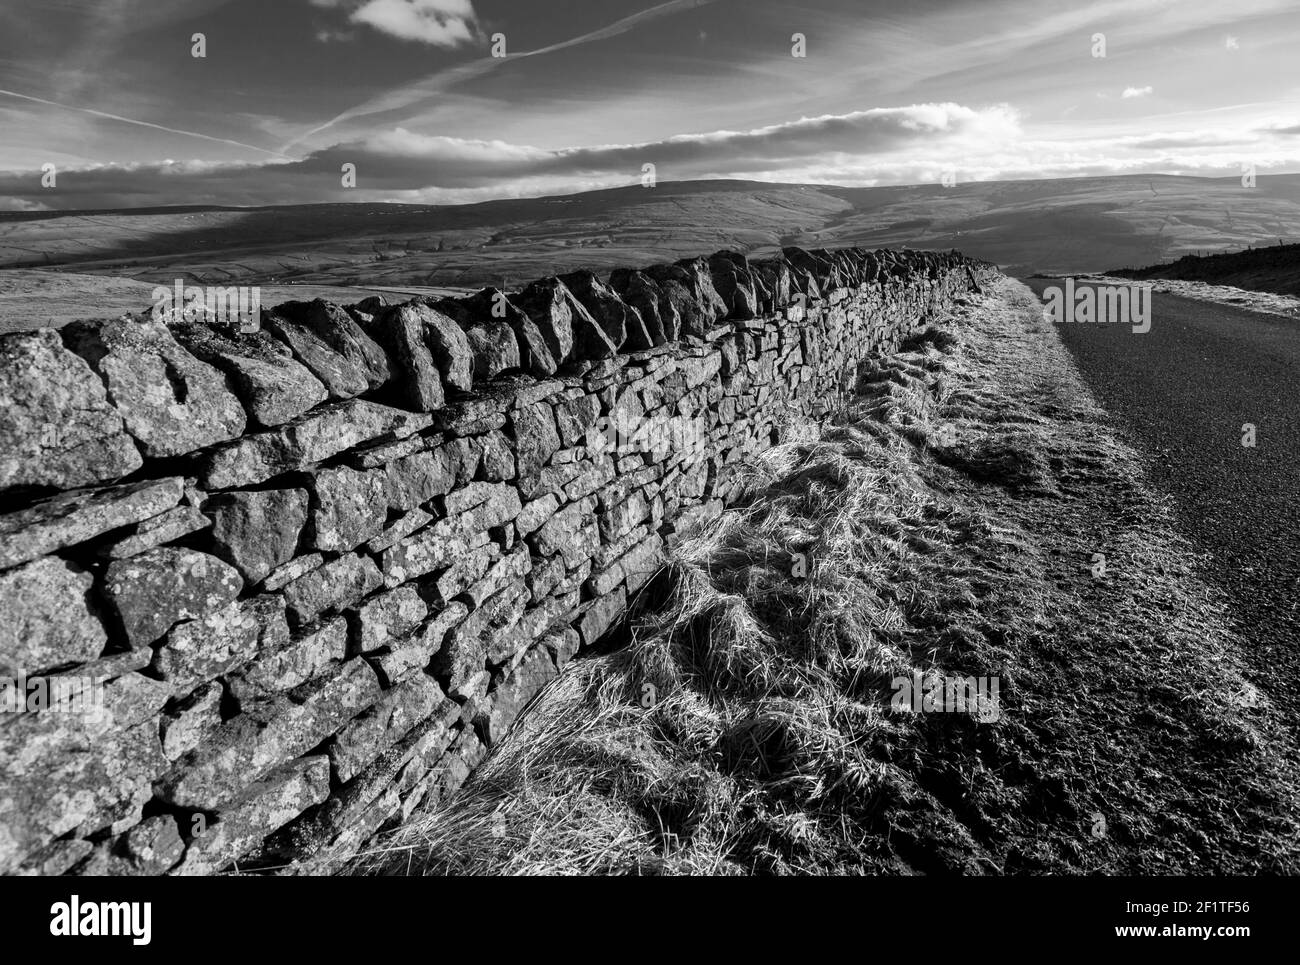 A dry stone wall in winter sunlight, leading into the distance alongside a country lane in the North Pennines, County Durham, England -B&W, monochrome Stock Photo